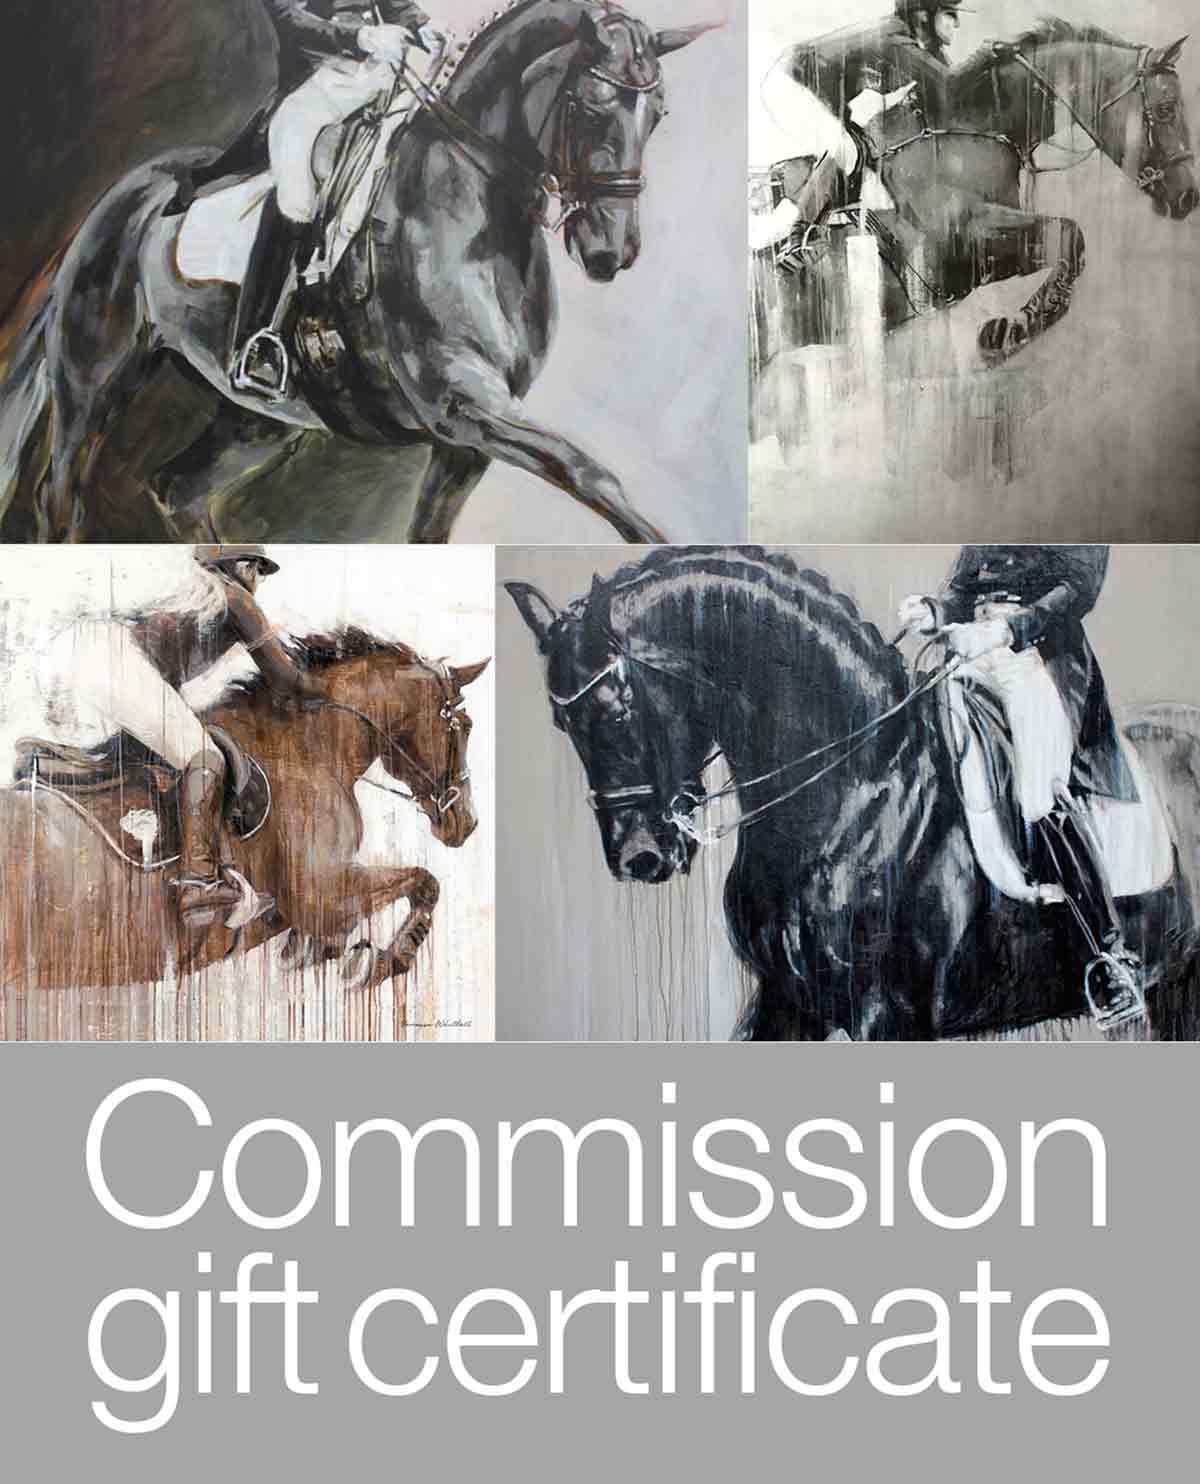 modern equestrian abstract portrait commission gift certificate